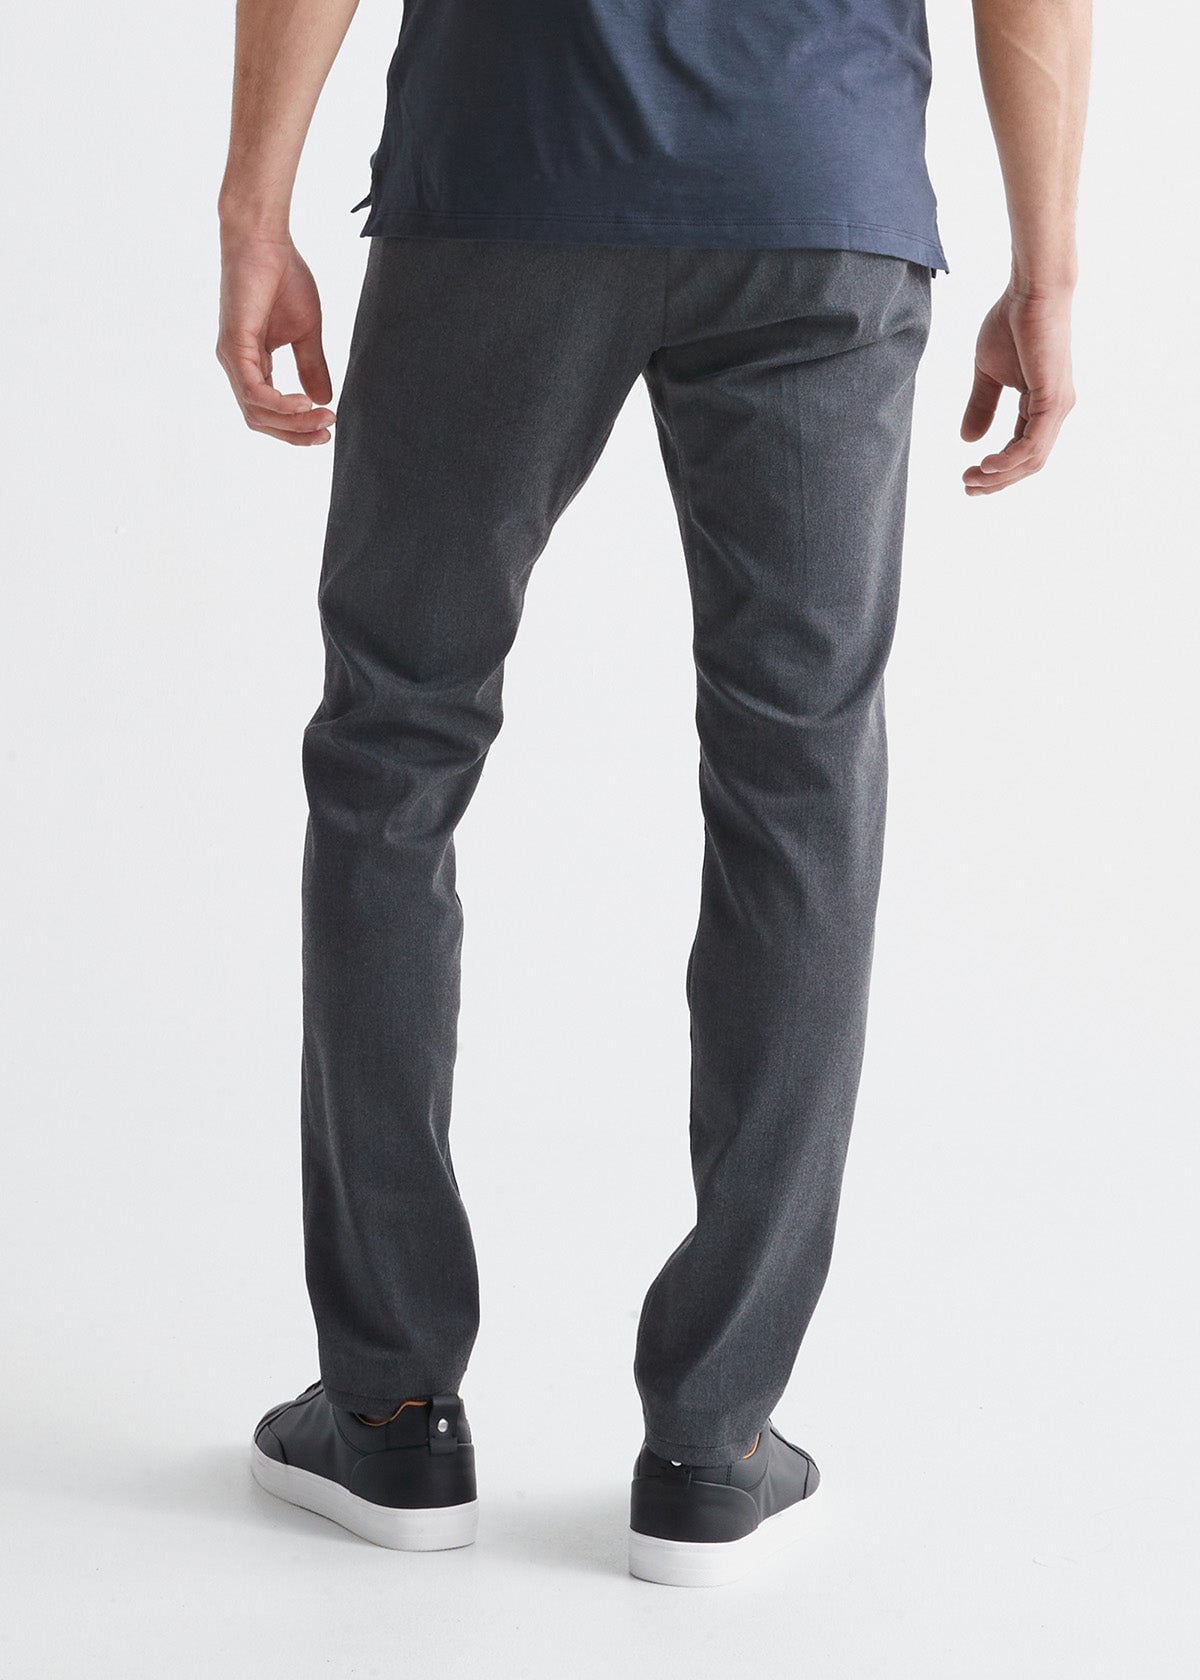 The Modern Stretch Slim Trouser - Charcoal